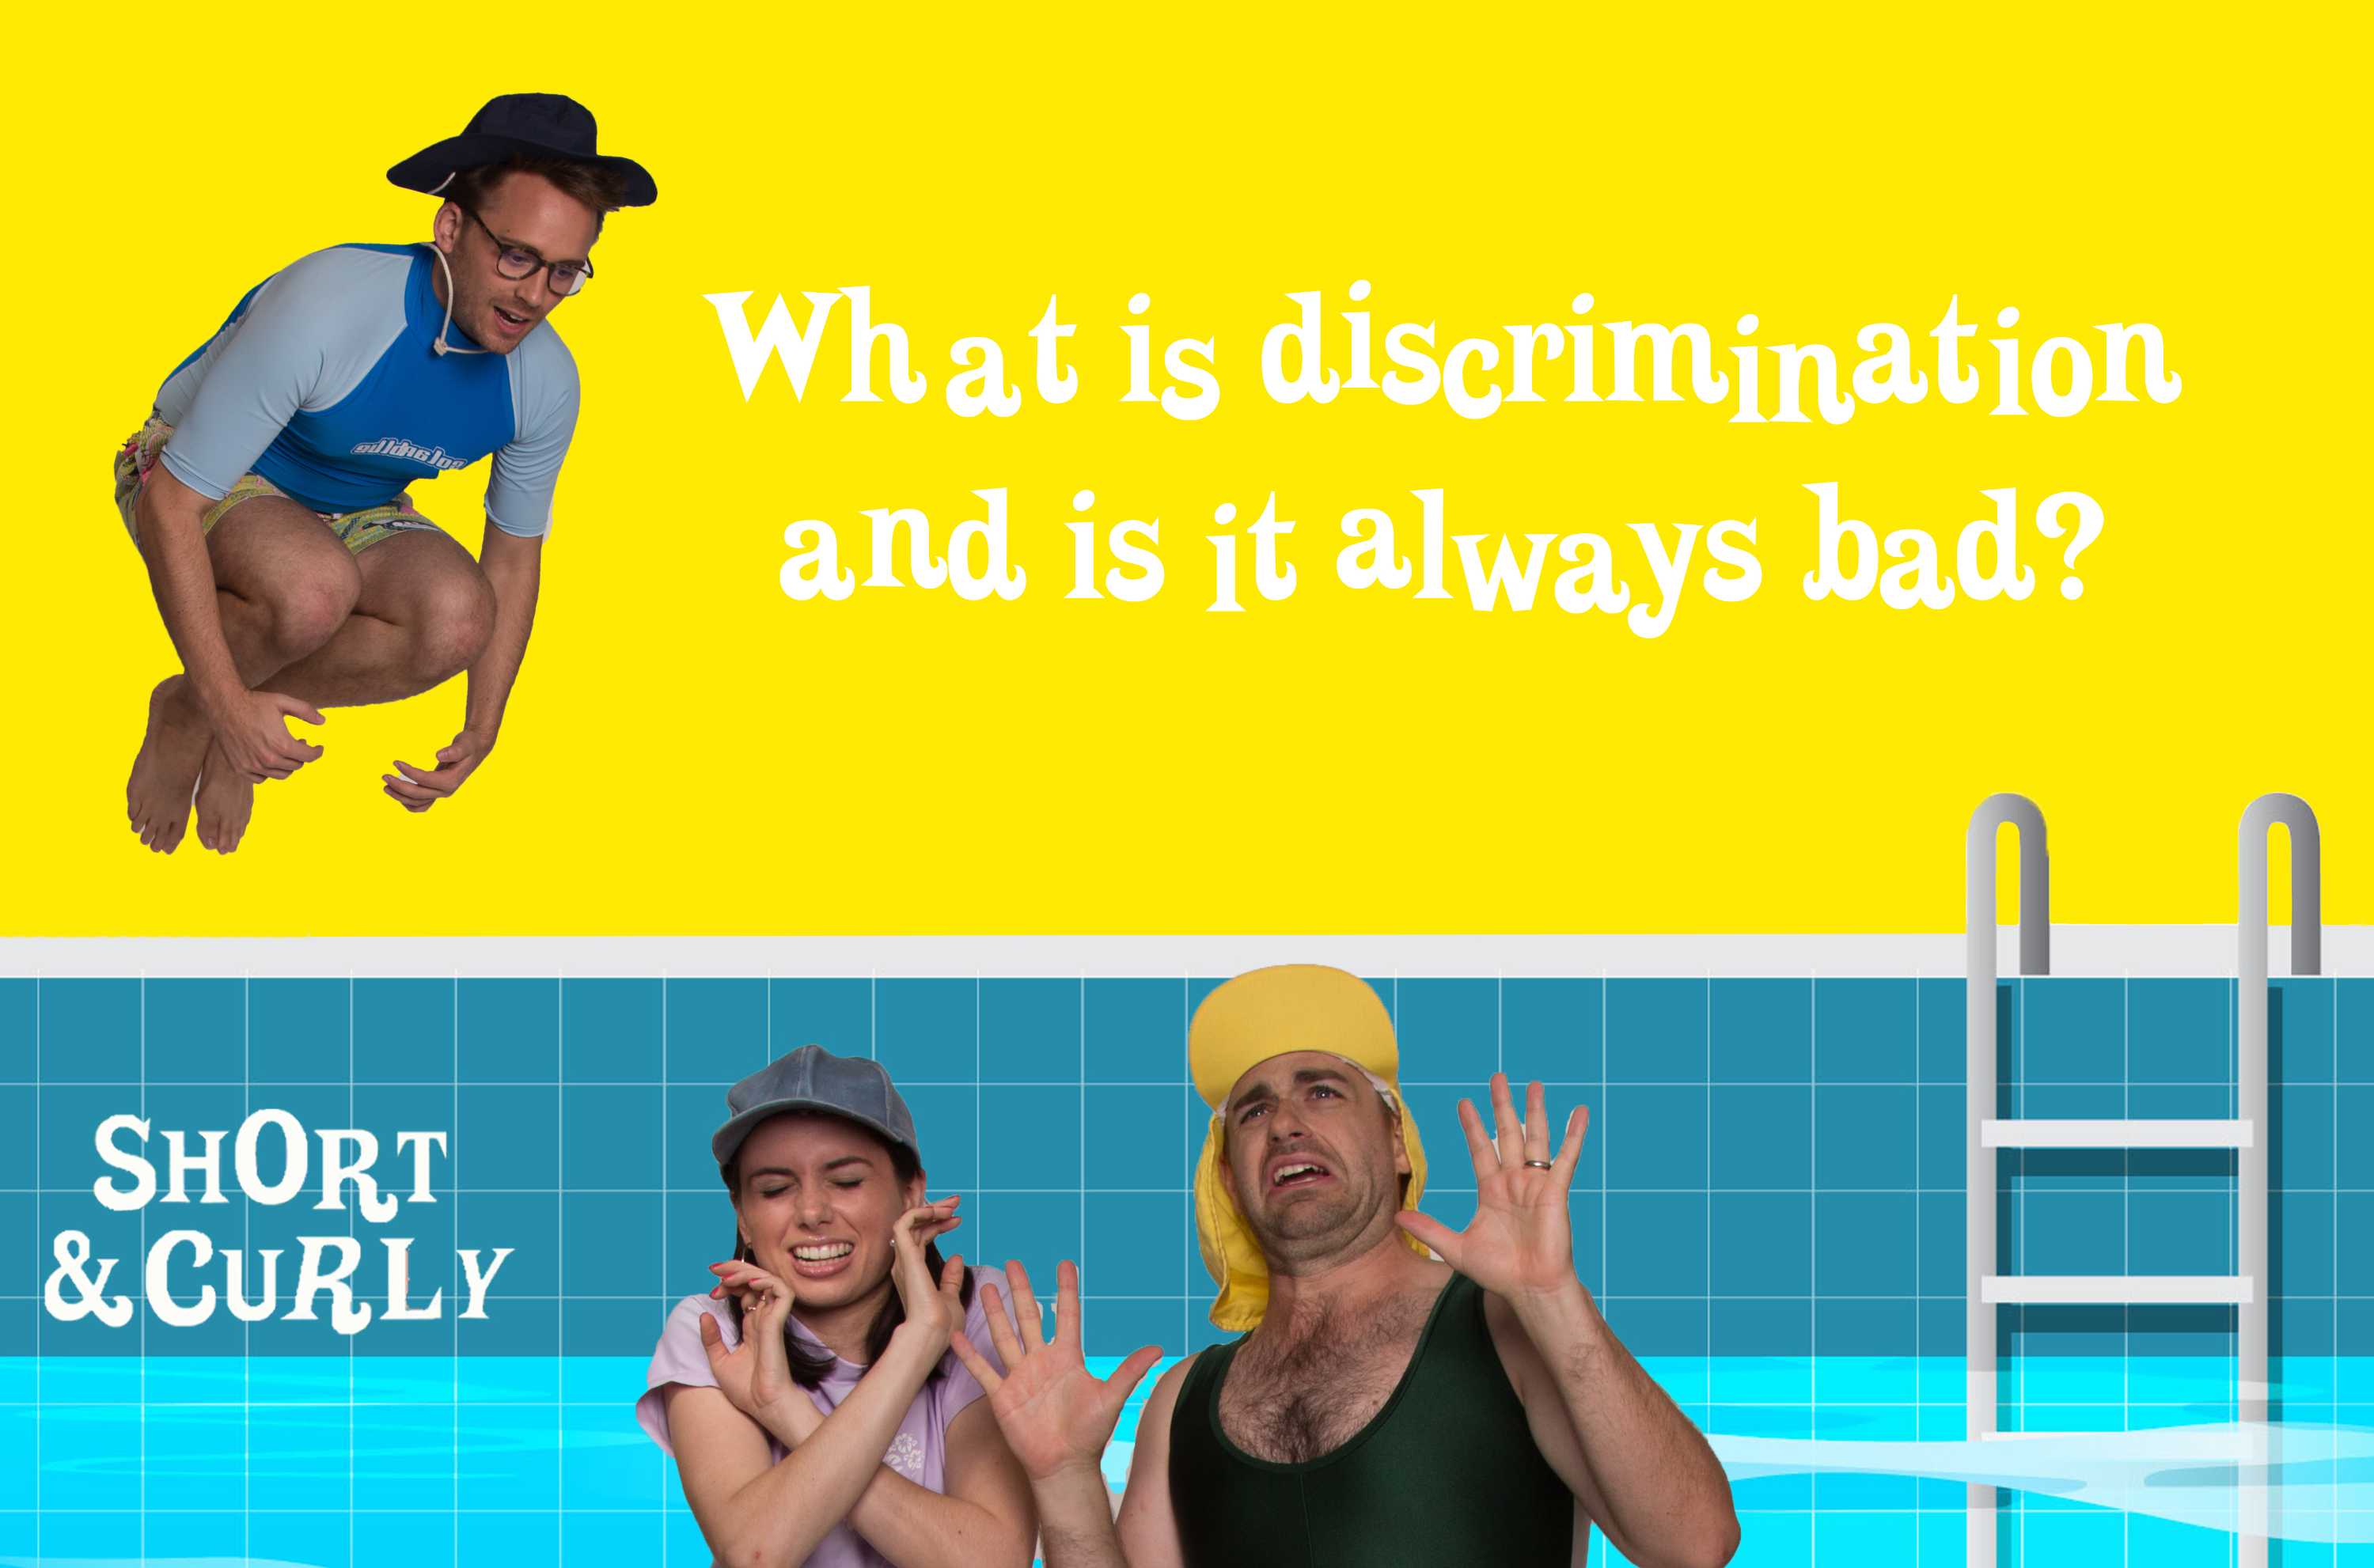 What is discrimination and is it always bad?